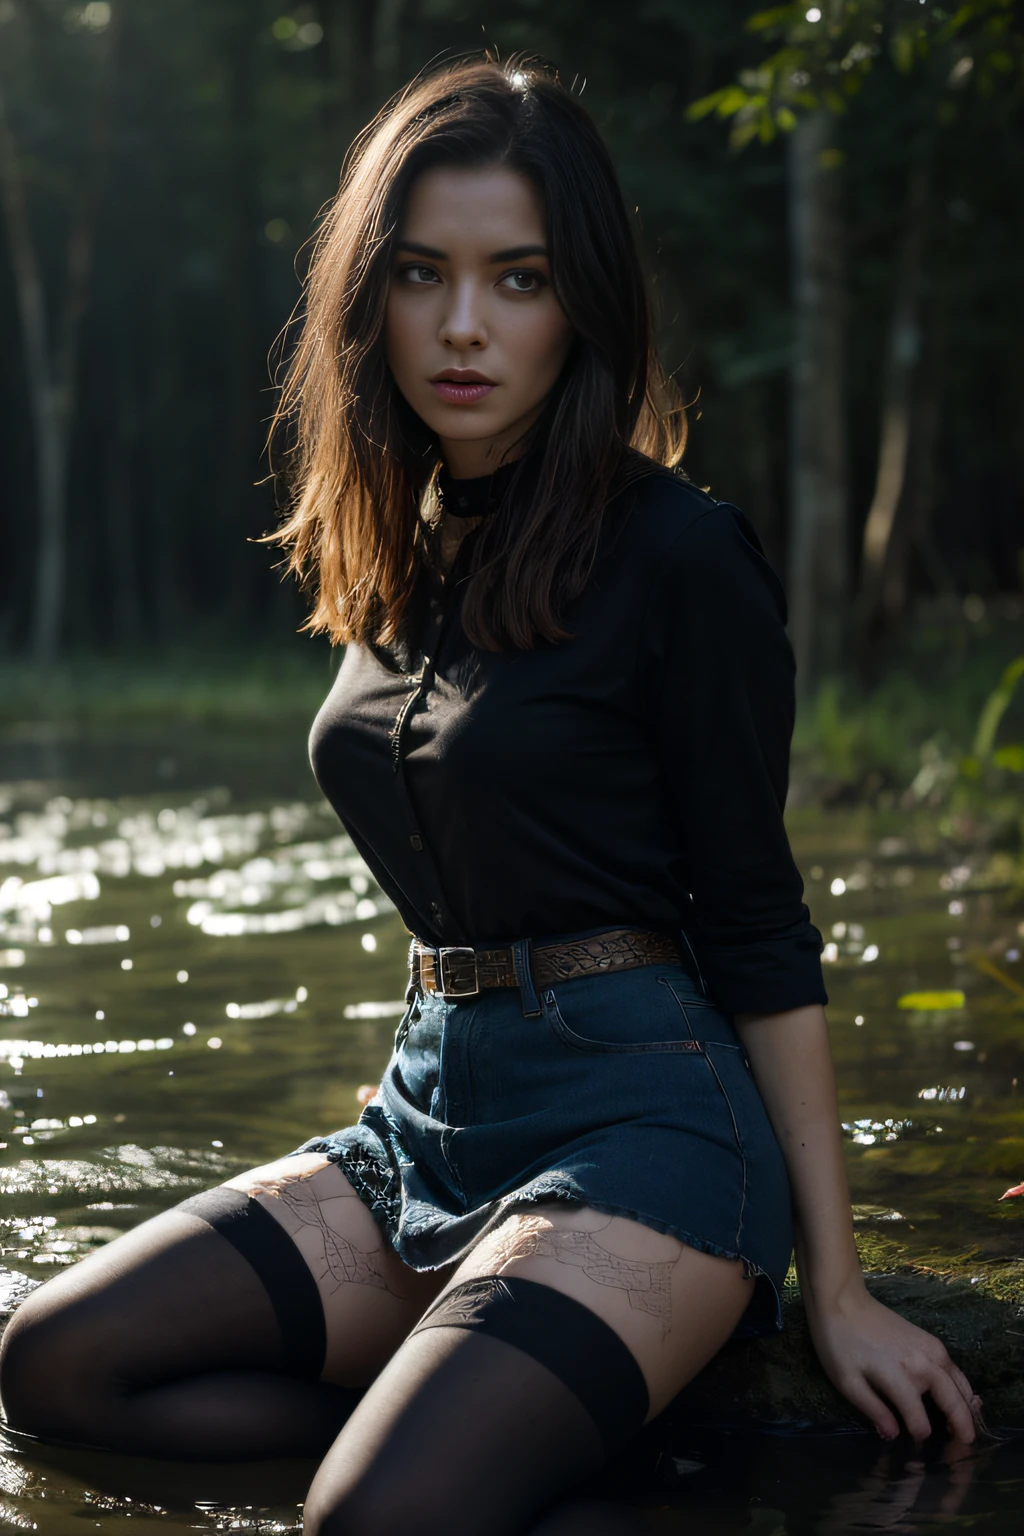 (Best Quality,hight resolution:1.2),The woman,Expressive wrinkles,Bob haircut,jeans skirt,blouse,(dark lace stockings with garters), ( drowning in a swamp:1.2),Detailed eyes and face,expression of despair,Dark and moody lighting,ominous vibe,desperation,(Imminent Doom:1.1), Psychological thriller, (Meanders:1.3)